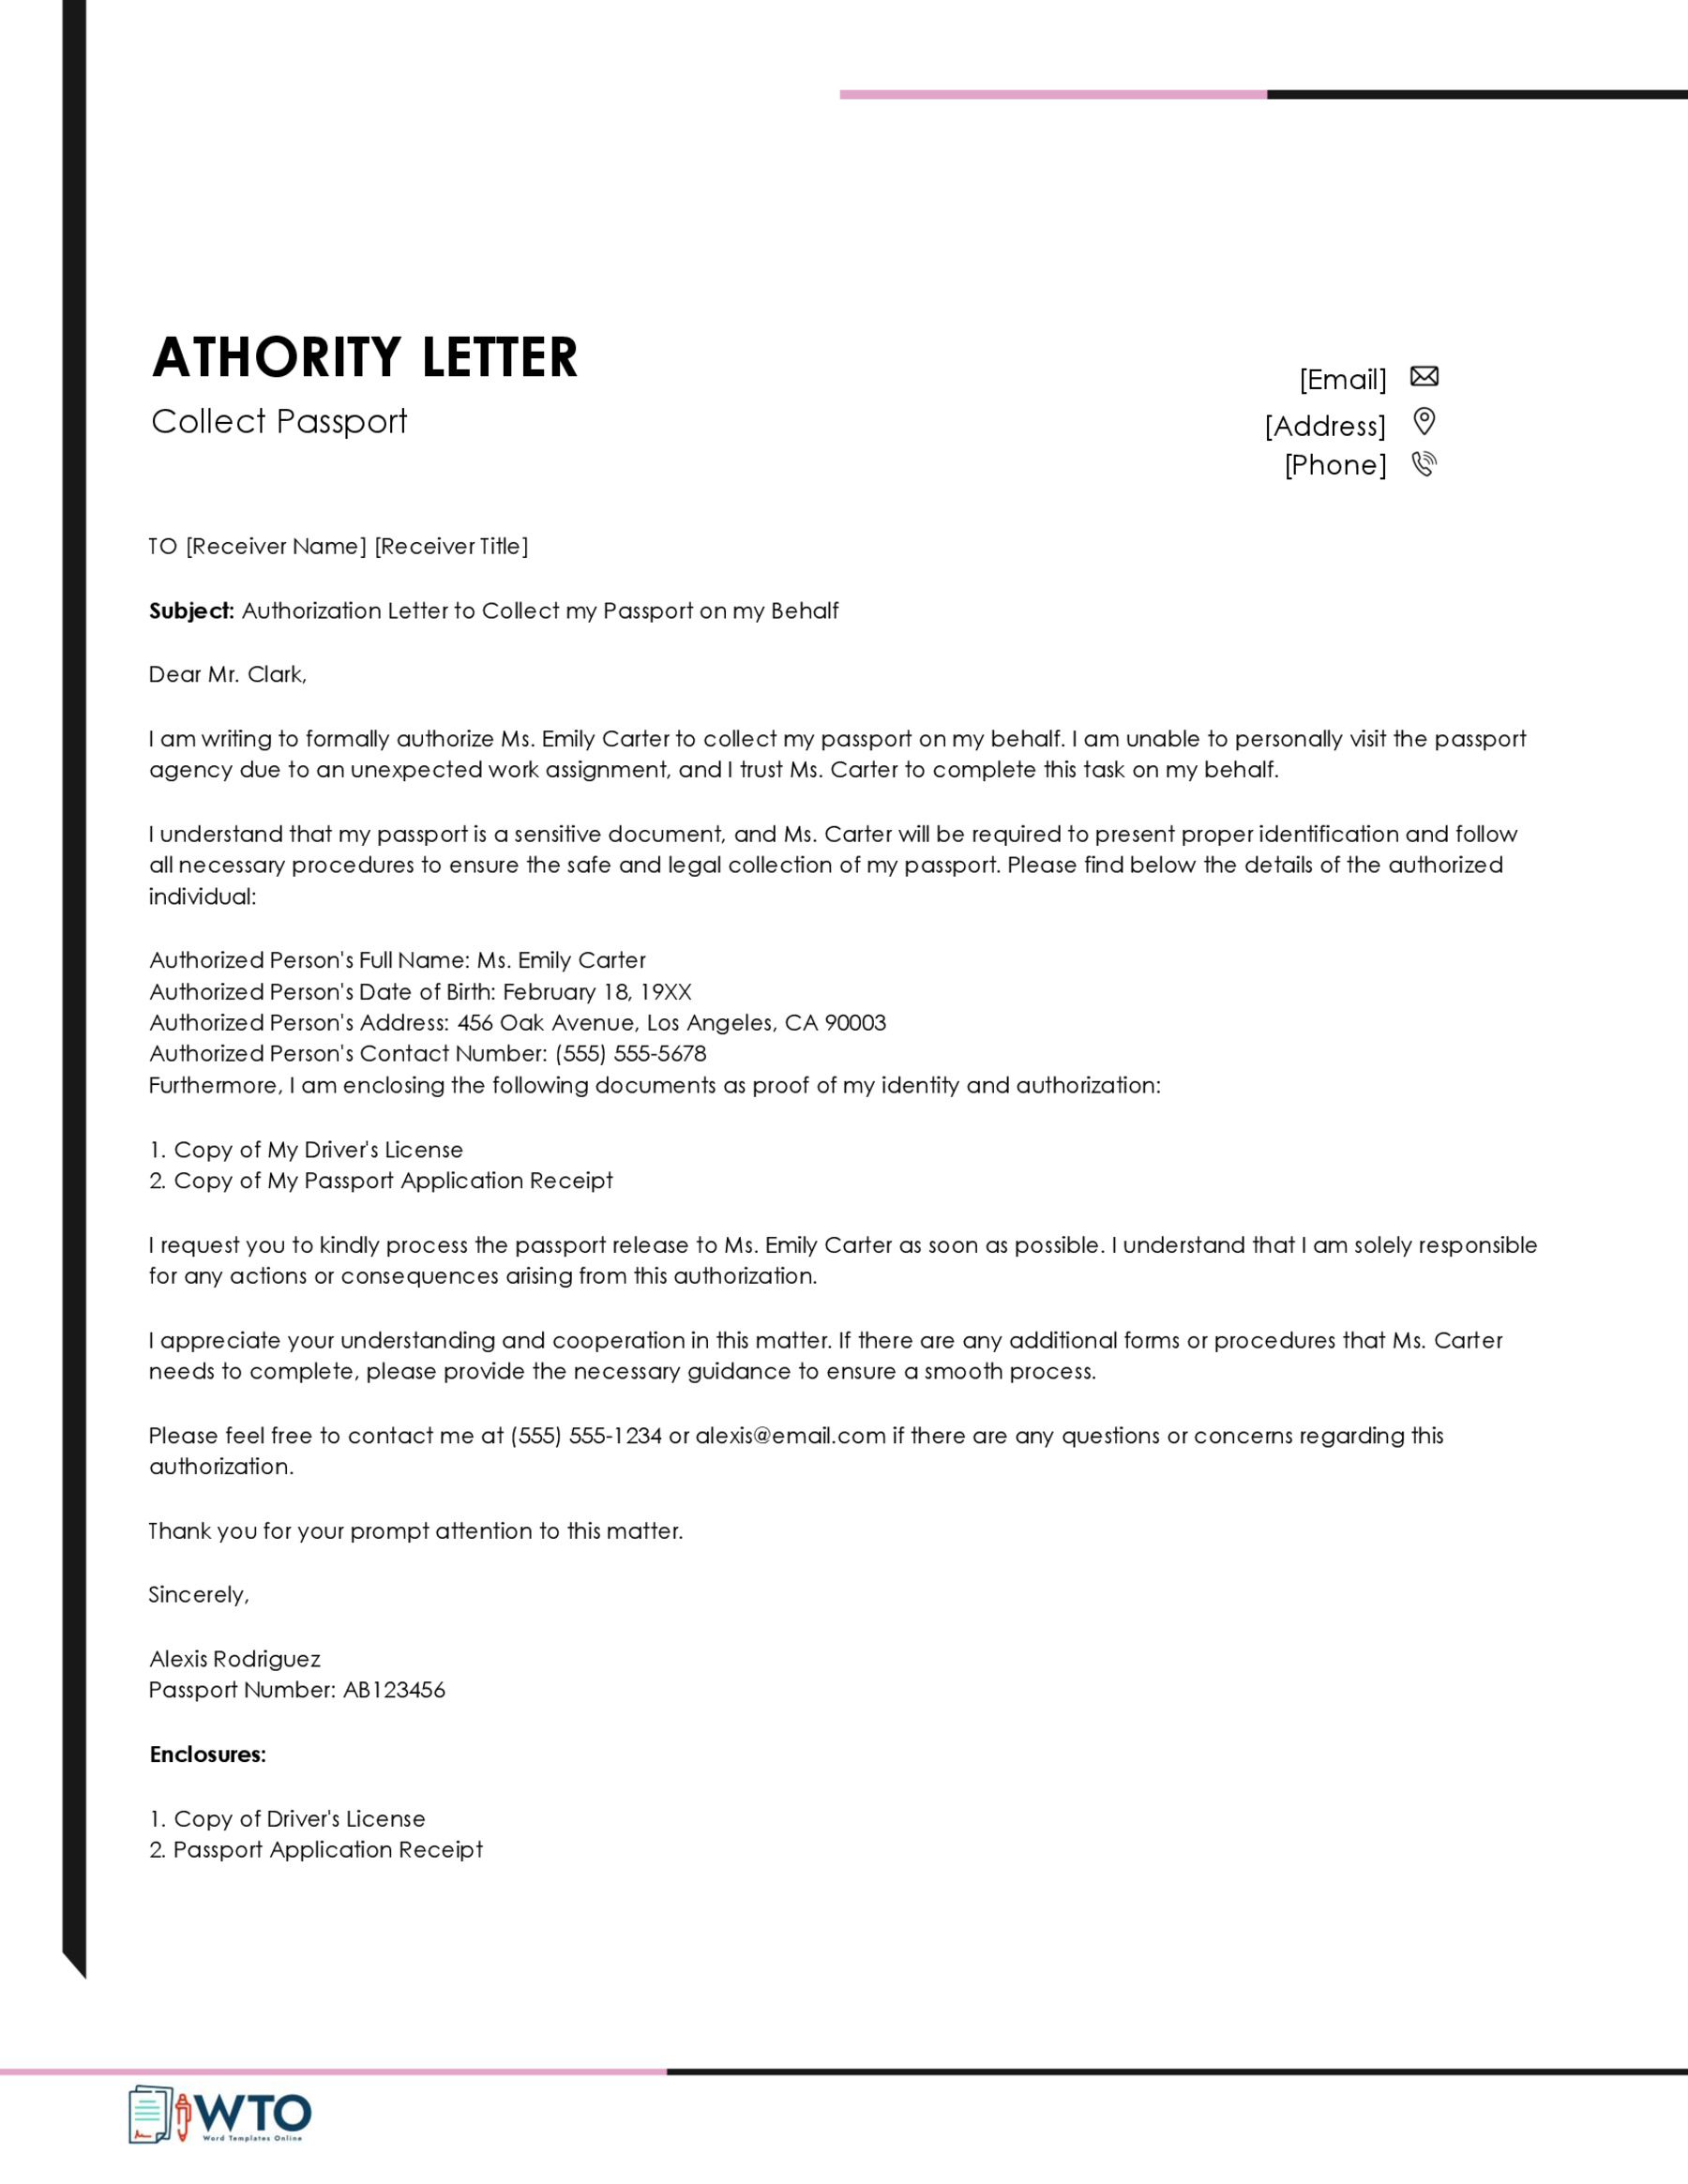 Authorization Letter to Collect Passport Example Download